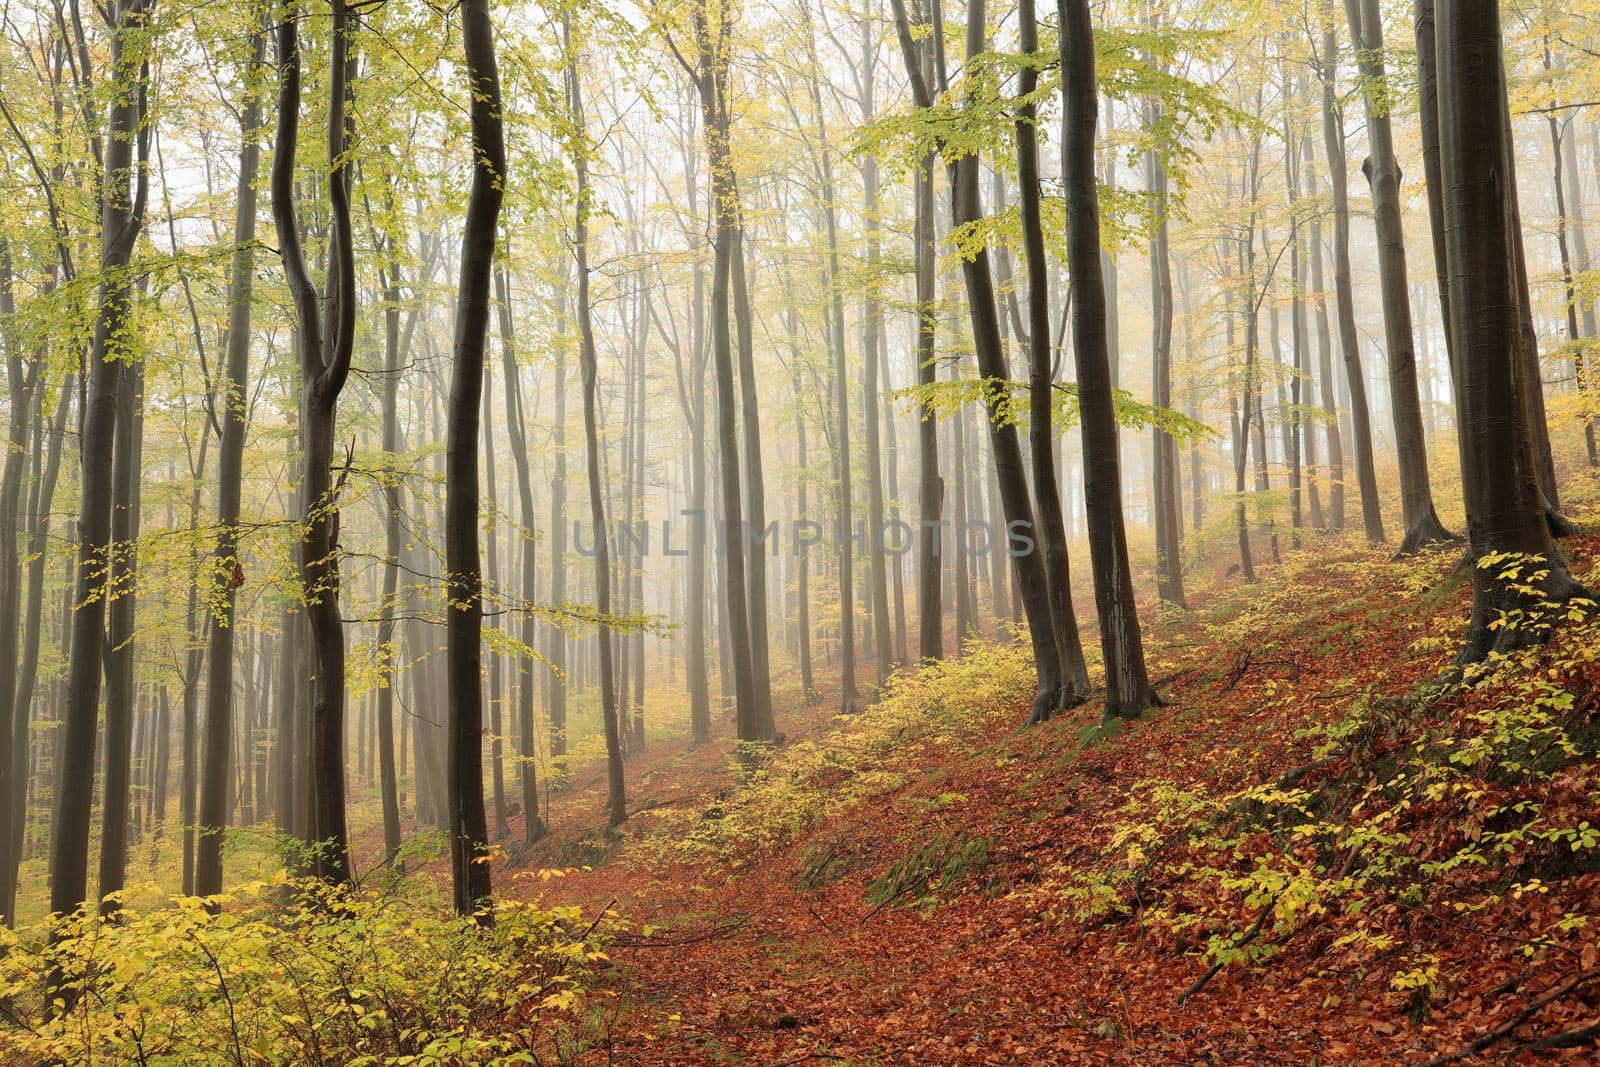 Misty autumn forest by nature78